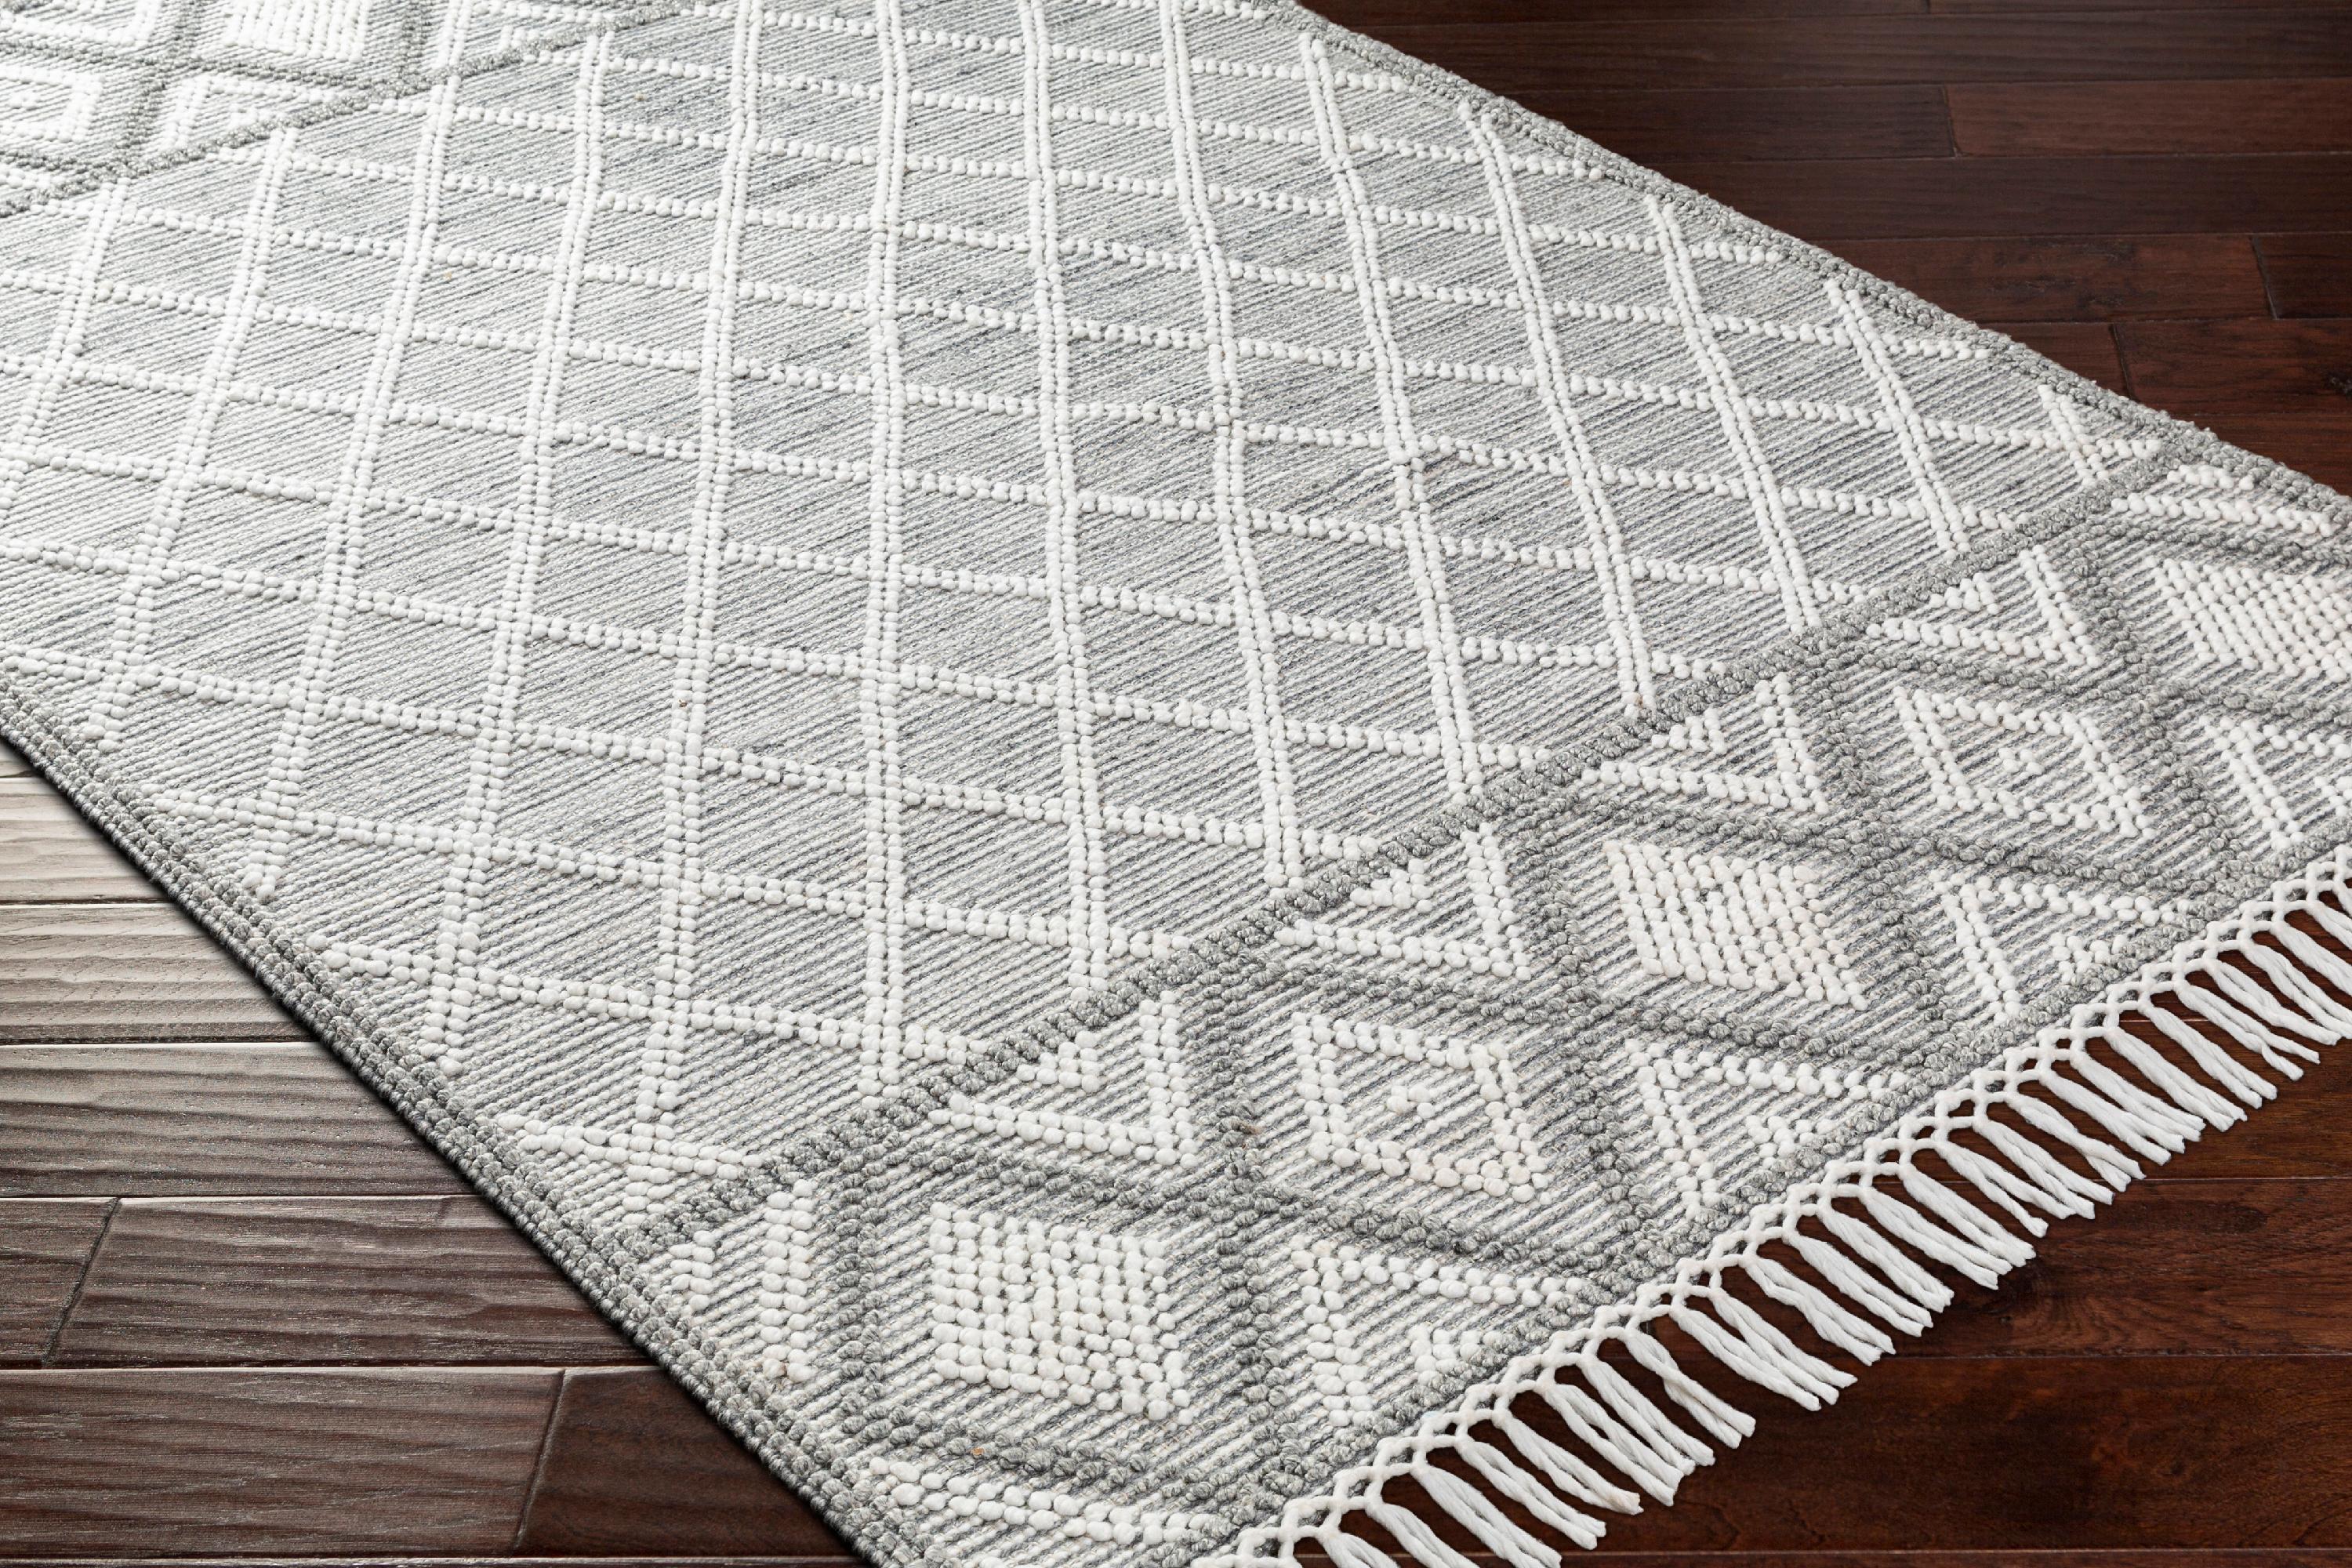 Mark&Day Area Rugs, 2x4 Ovgoros Global Light Gray Area Rug (2'3" x 3'9") - image 3 of 6